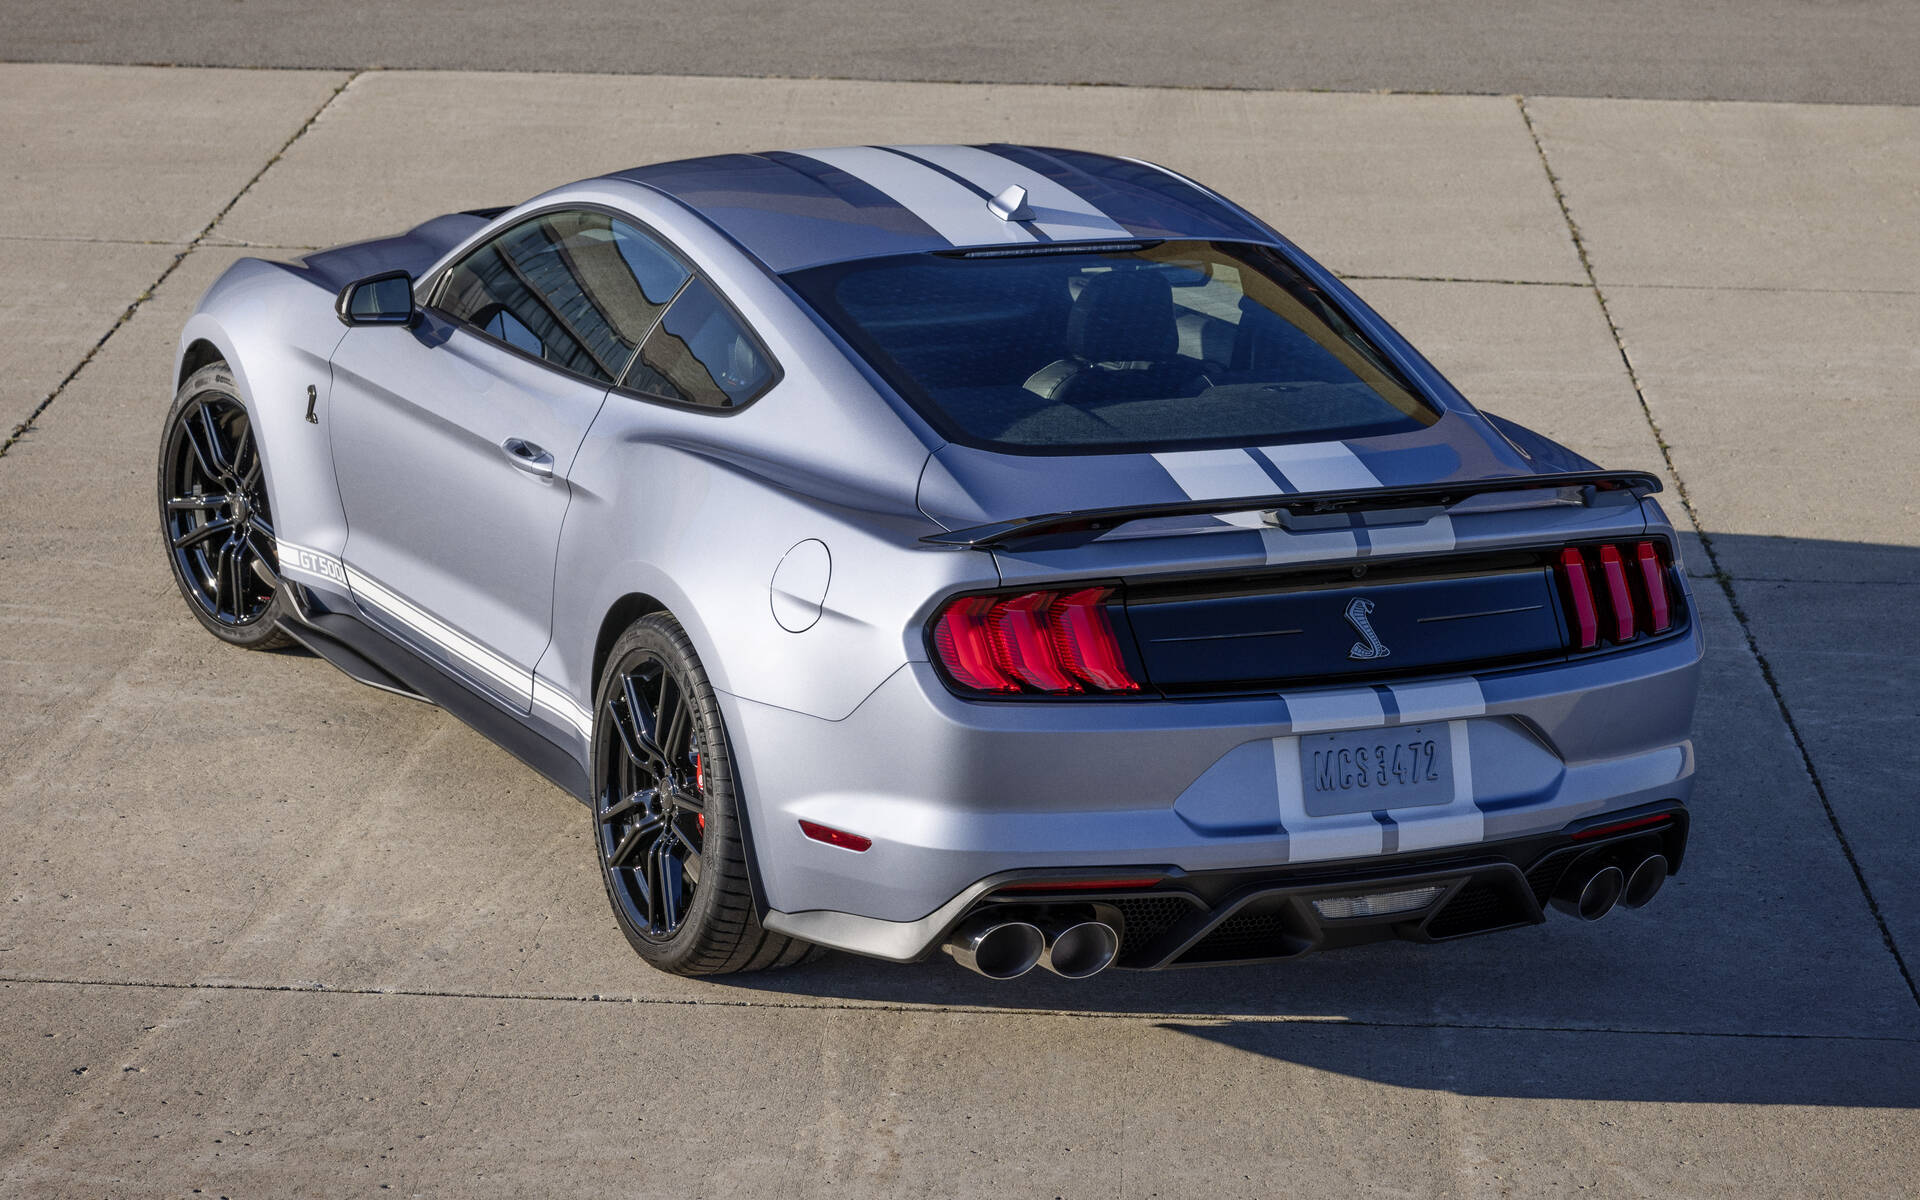 Ford Mustang Shelby GT500 : une édition Heritage pour ses 55 ans 495408-ford-mustang-shelby-gt500-une-edition-heritage-pour-les-55-ans